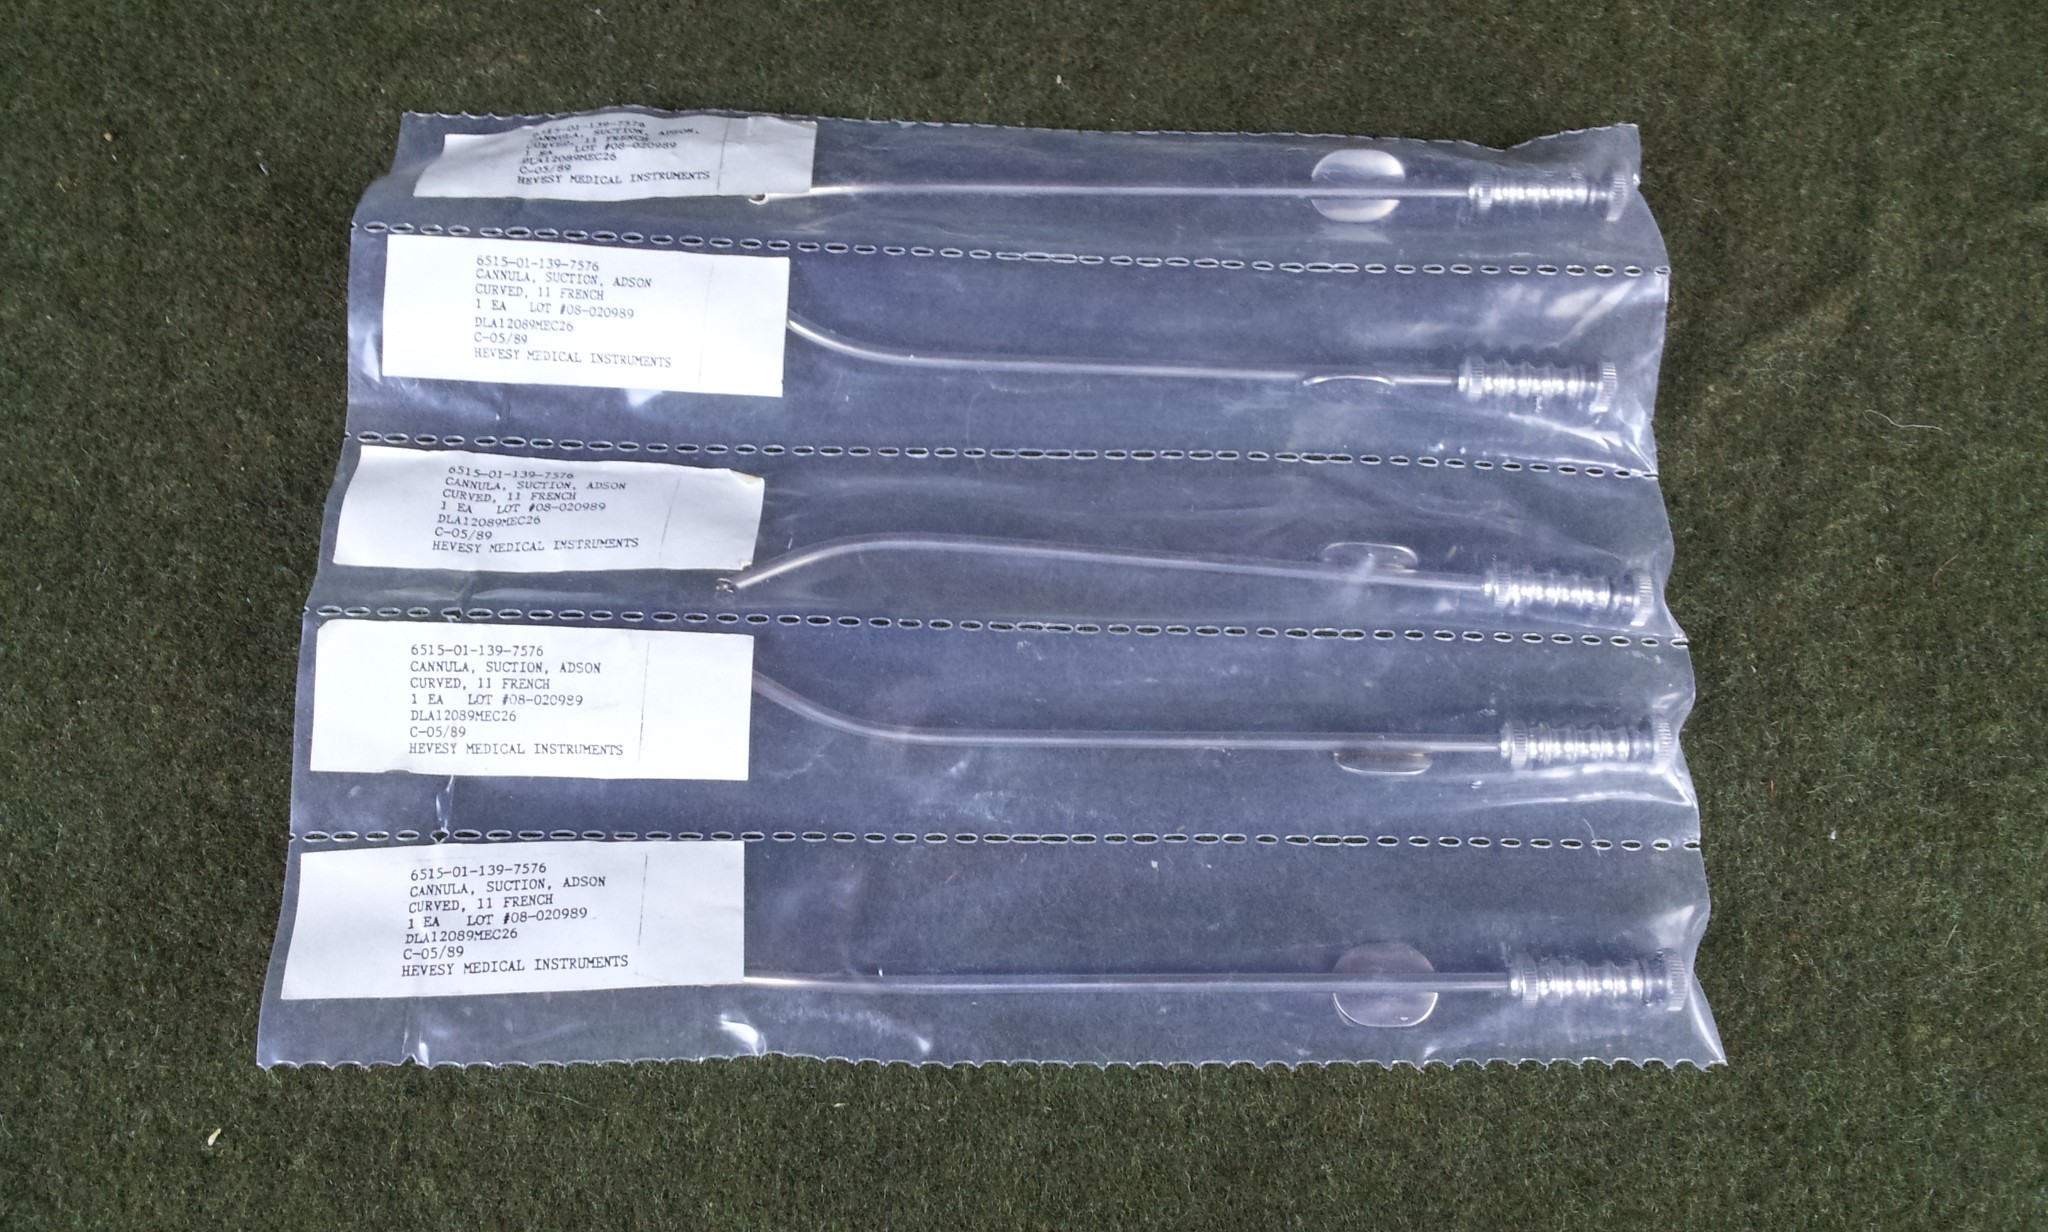 Cannula Suction Adson Curved 11 French Lot Of 5 New Old Stock